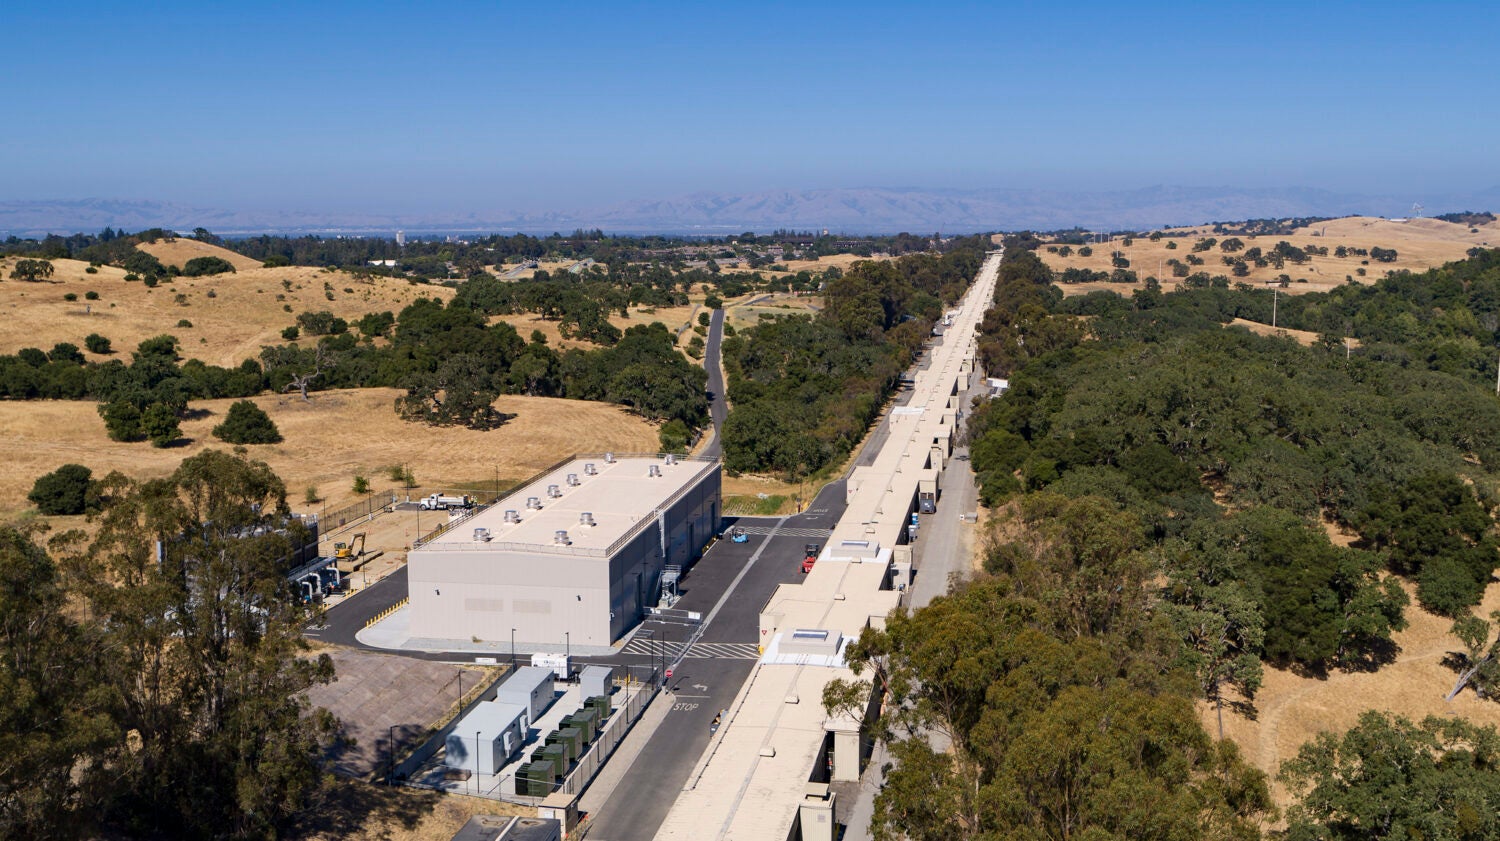 SLAC's Linac Coherent Light Source X-ray free-electron laser is housed in this building.